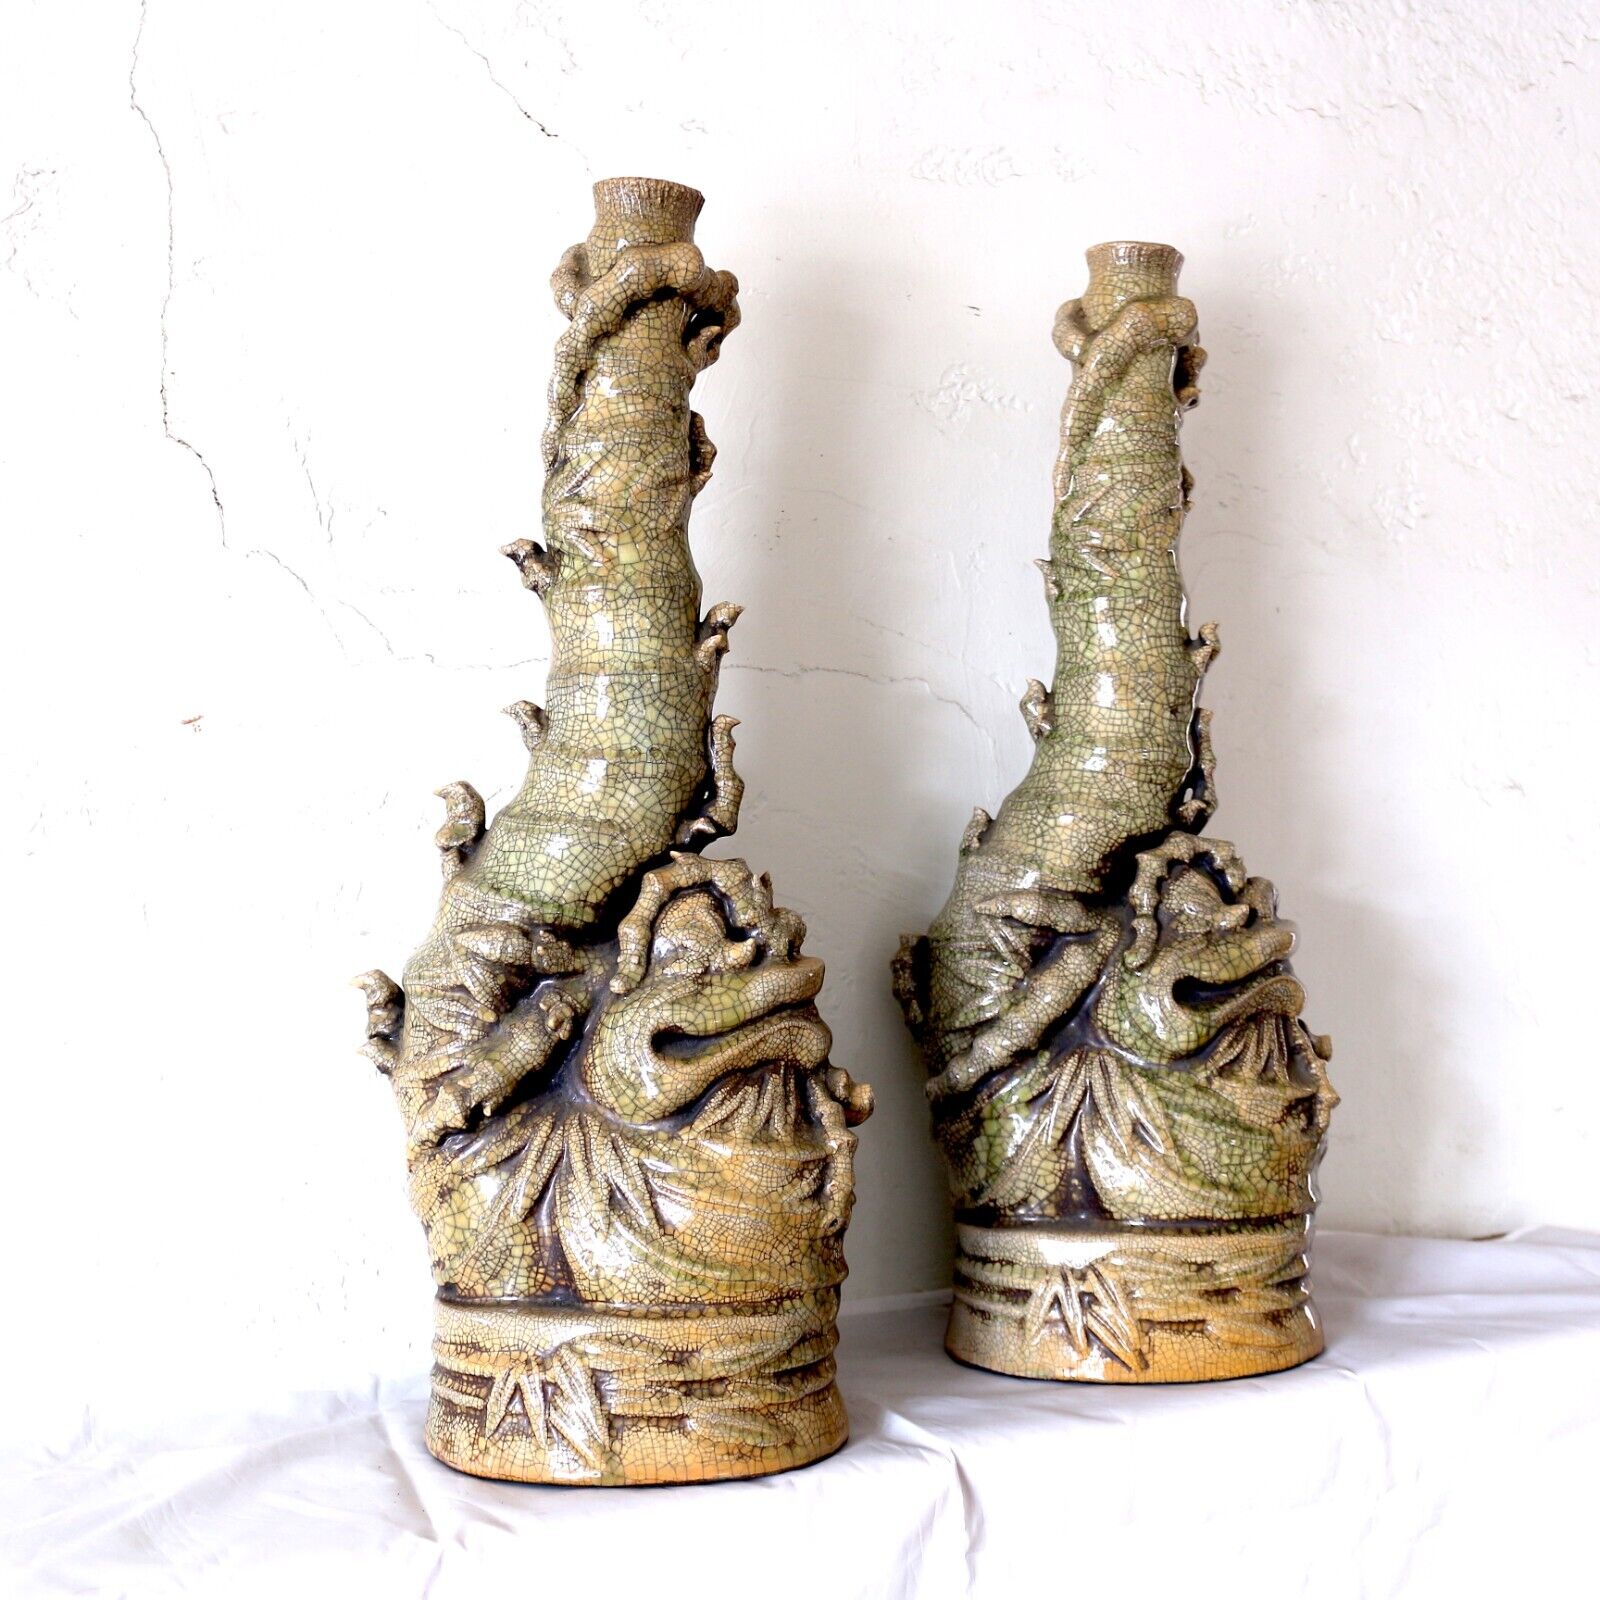 Pair Of Vintage Glazed Chinese  Ceramic Candle Holders 